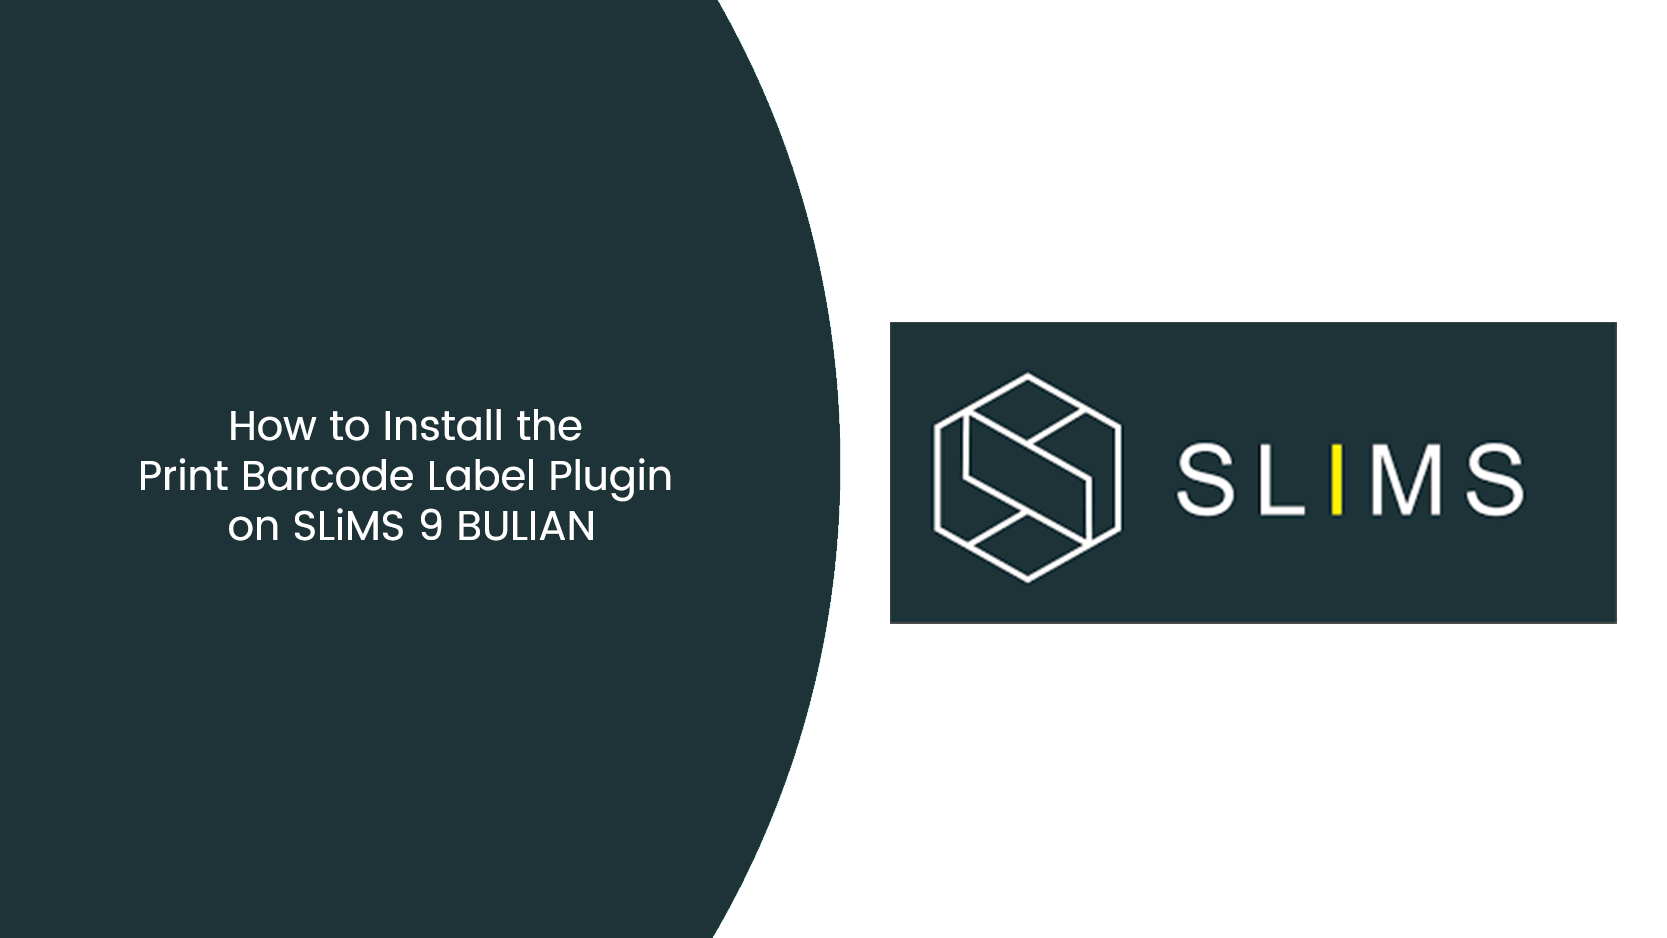 How to Install the Print Barcode Label Plugin on SLiMS 9 BULIAN